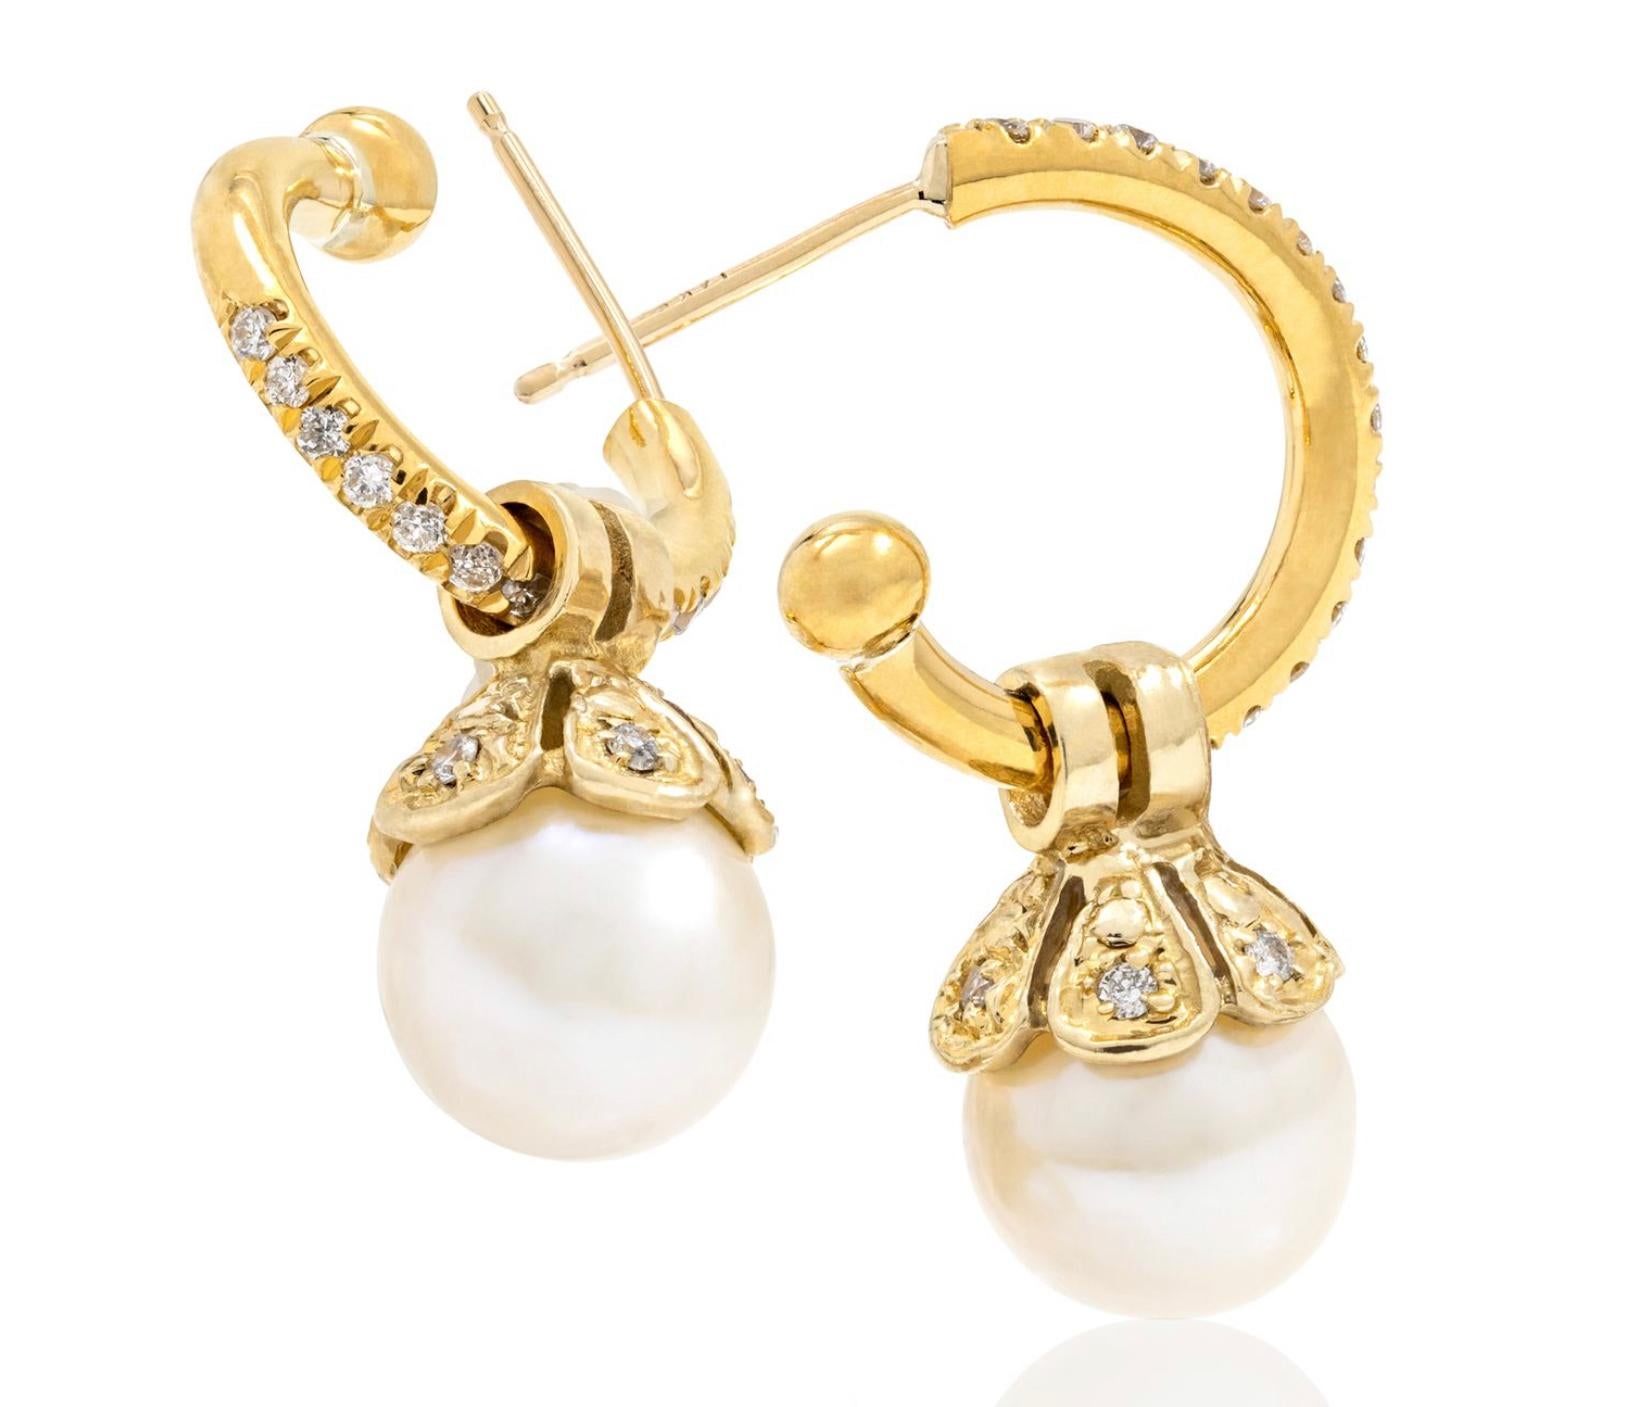 Contemporary Paris & Lily, 22k Gold, Diamond Hoop Earrings with Removable Pearl Pendants For Sale